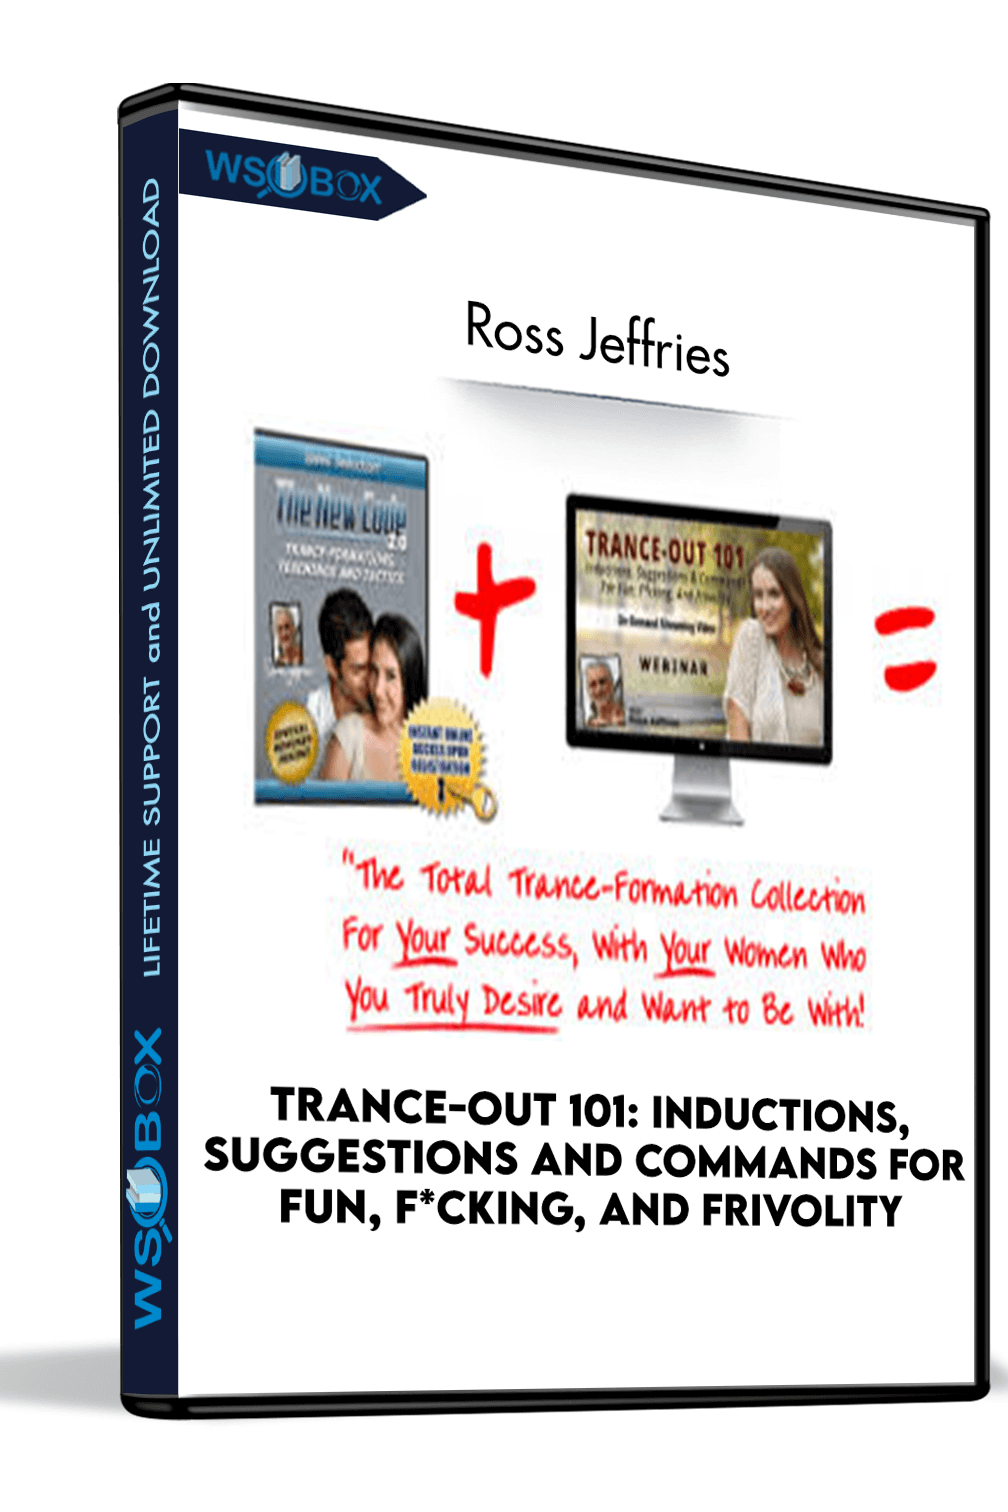 trance-out-101-inductions-suggestions-and-commands-for-fun-fcking-and-frivolity-ross-jeffries